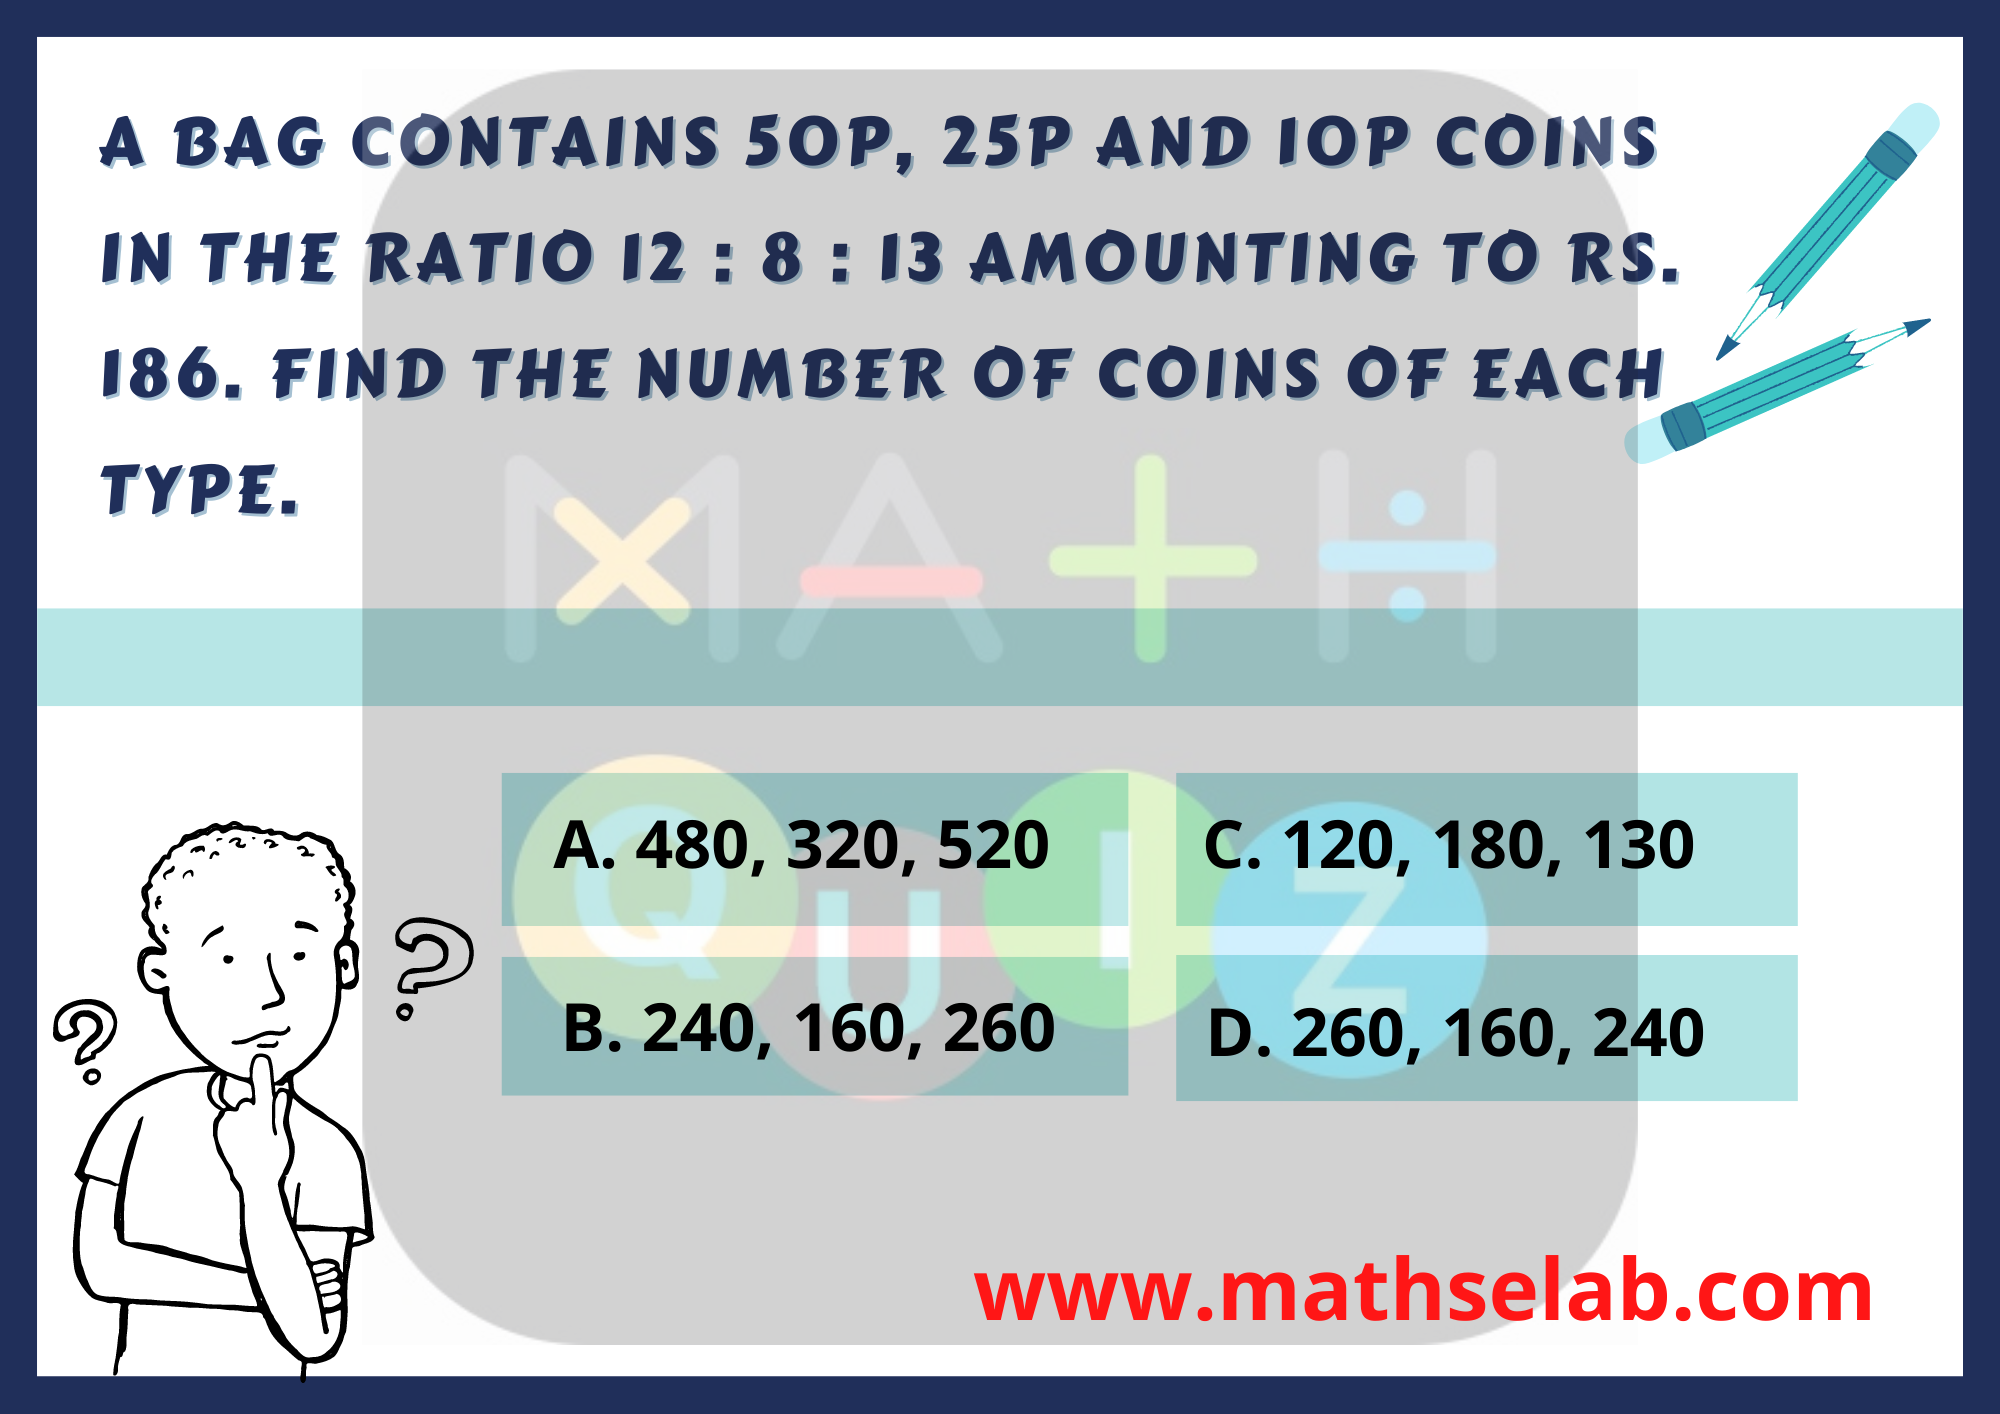 A bag contains 50p, 25p and 10p coins in the ratio 12 8 13 amounting to Rs. 186. Find the number of coins of each type....www.mathselab.com (1)